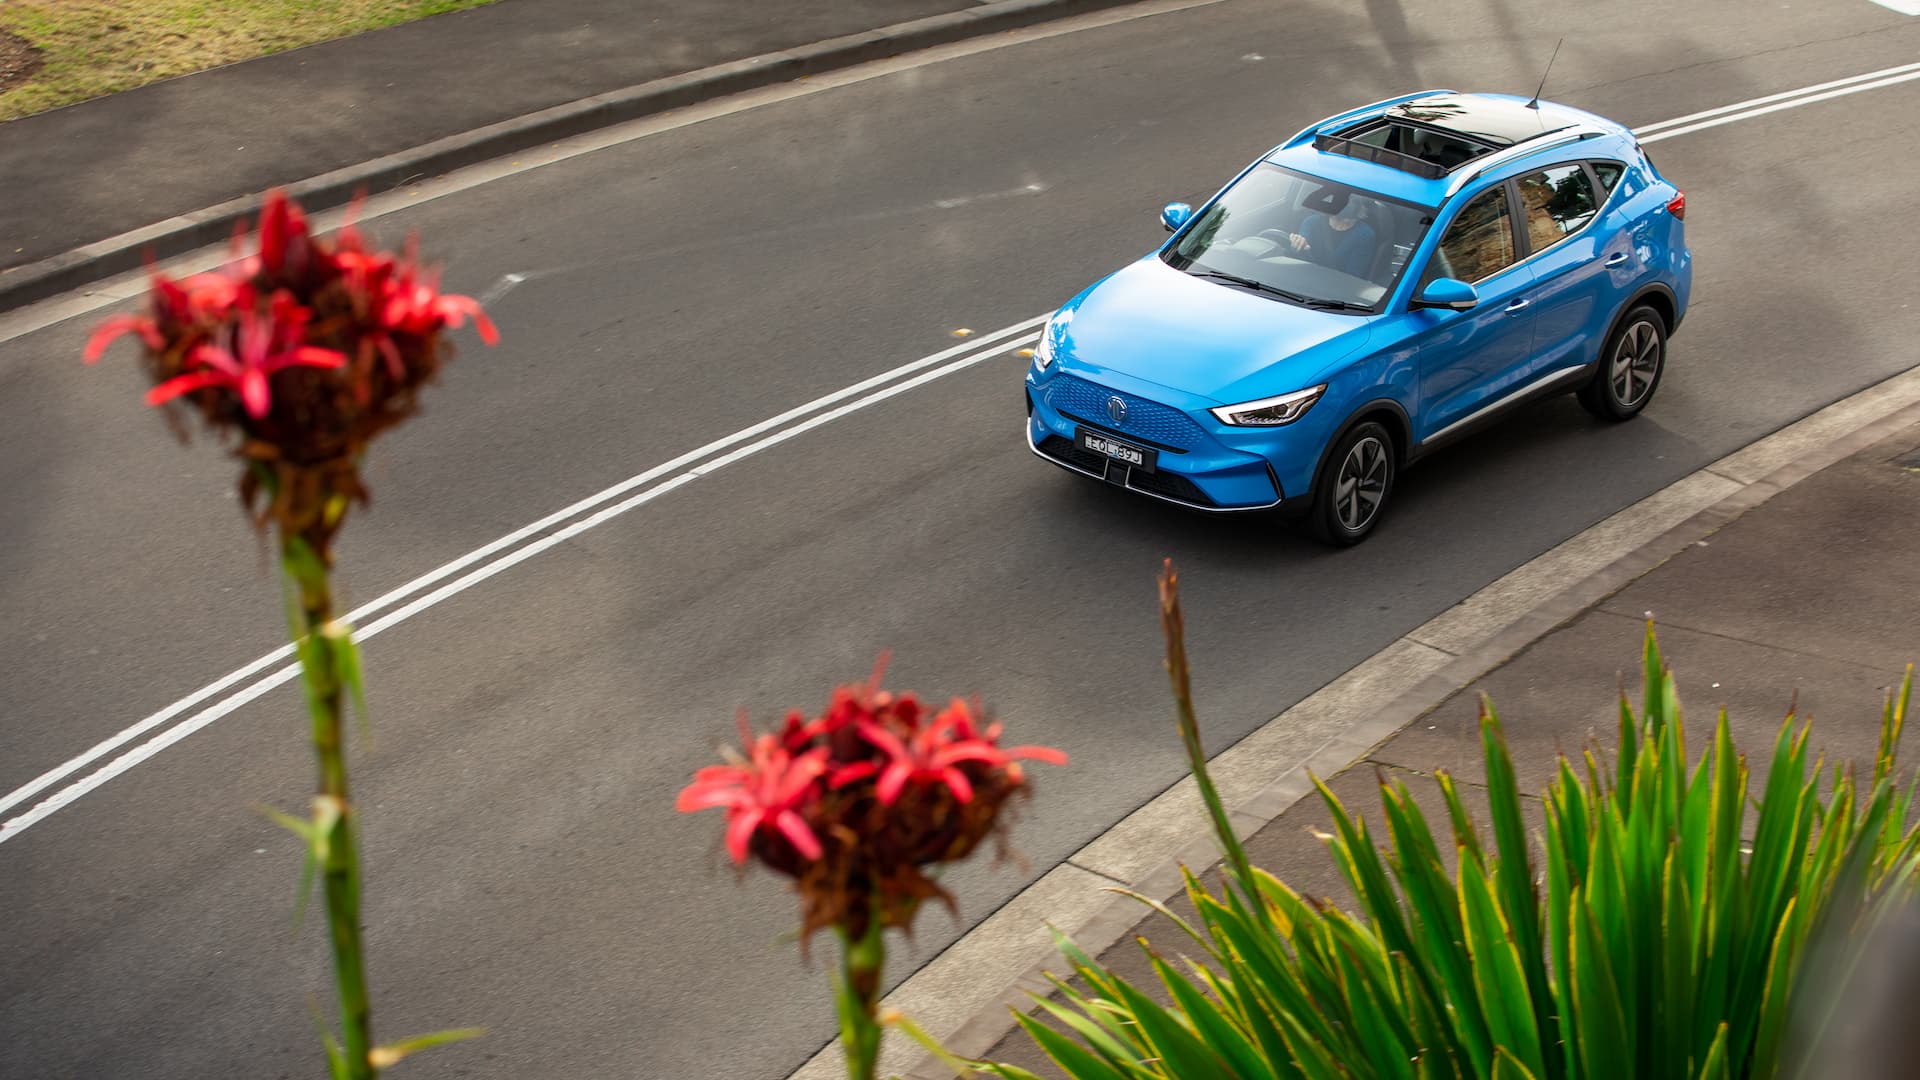 MG ZS EV driving on road in front of flowers